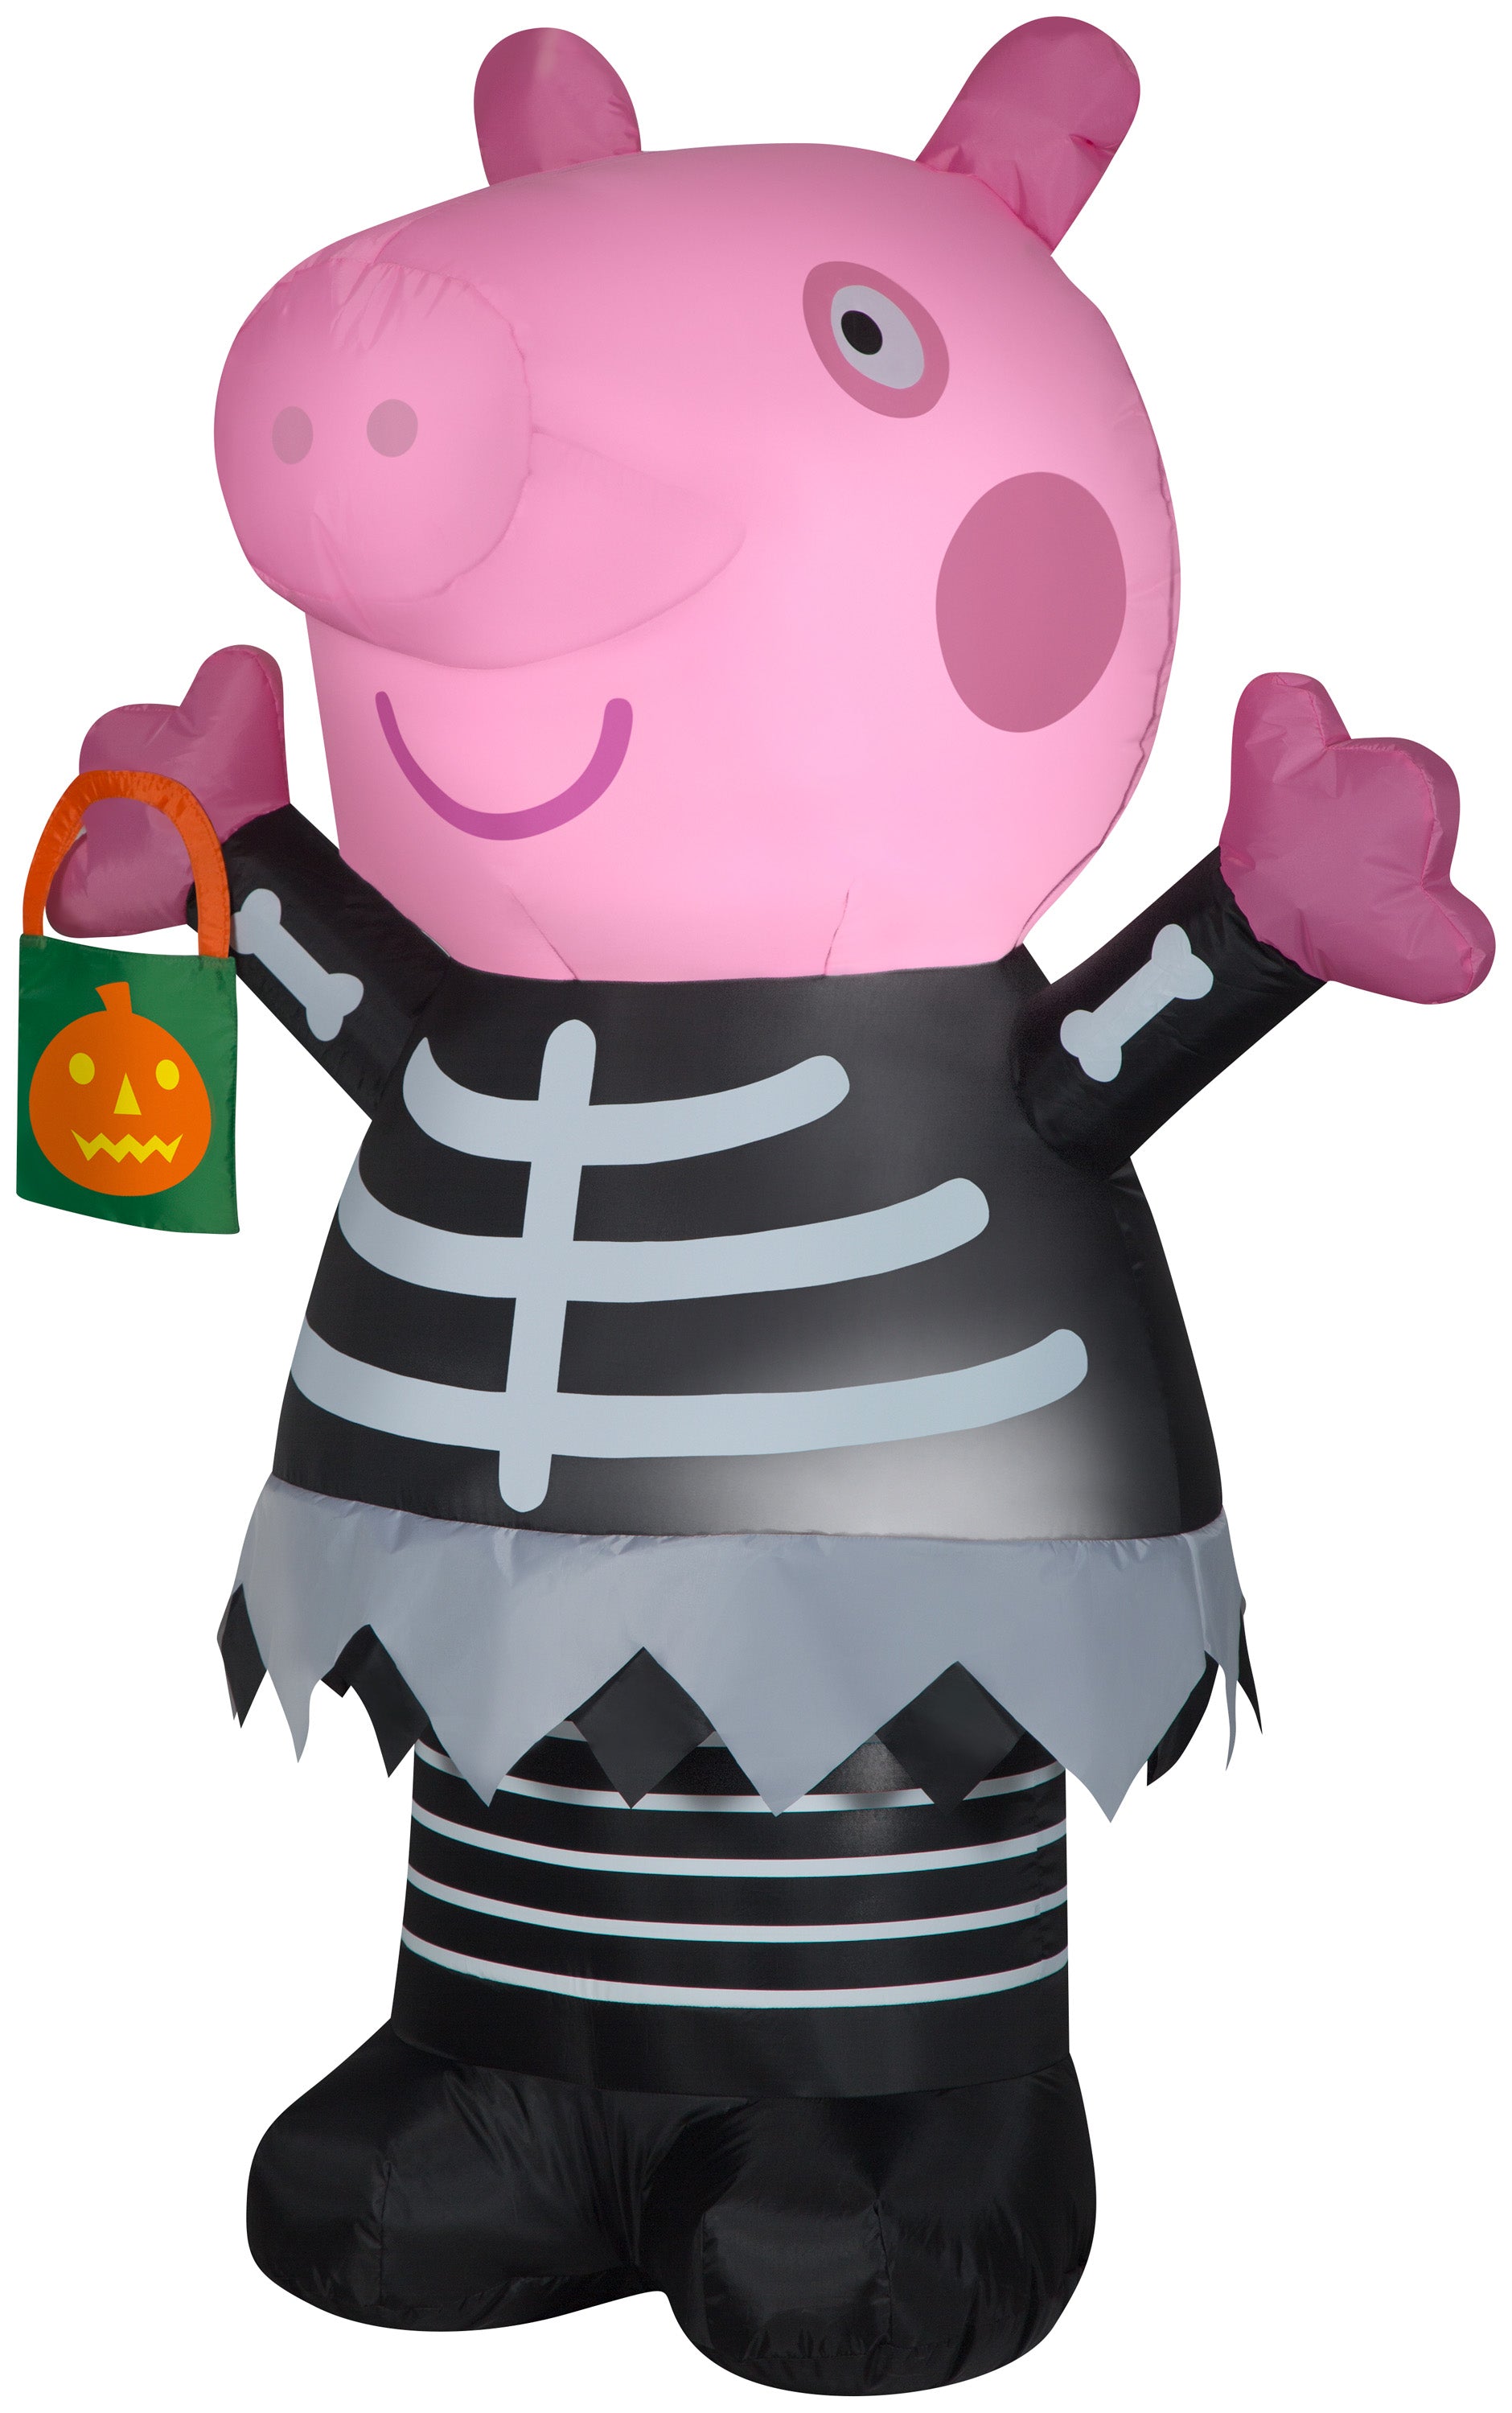 Gemmy Airblown Inflatable Peppa Pig in Skeleton Costume, 4.5 ft Tall, Pink